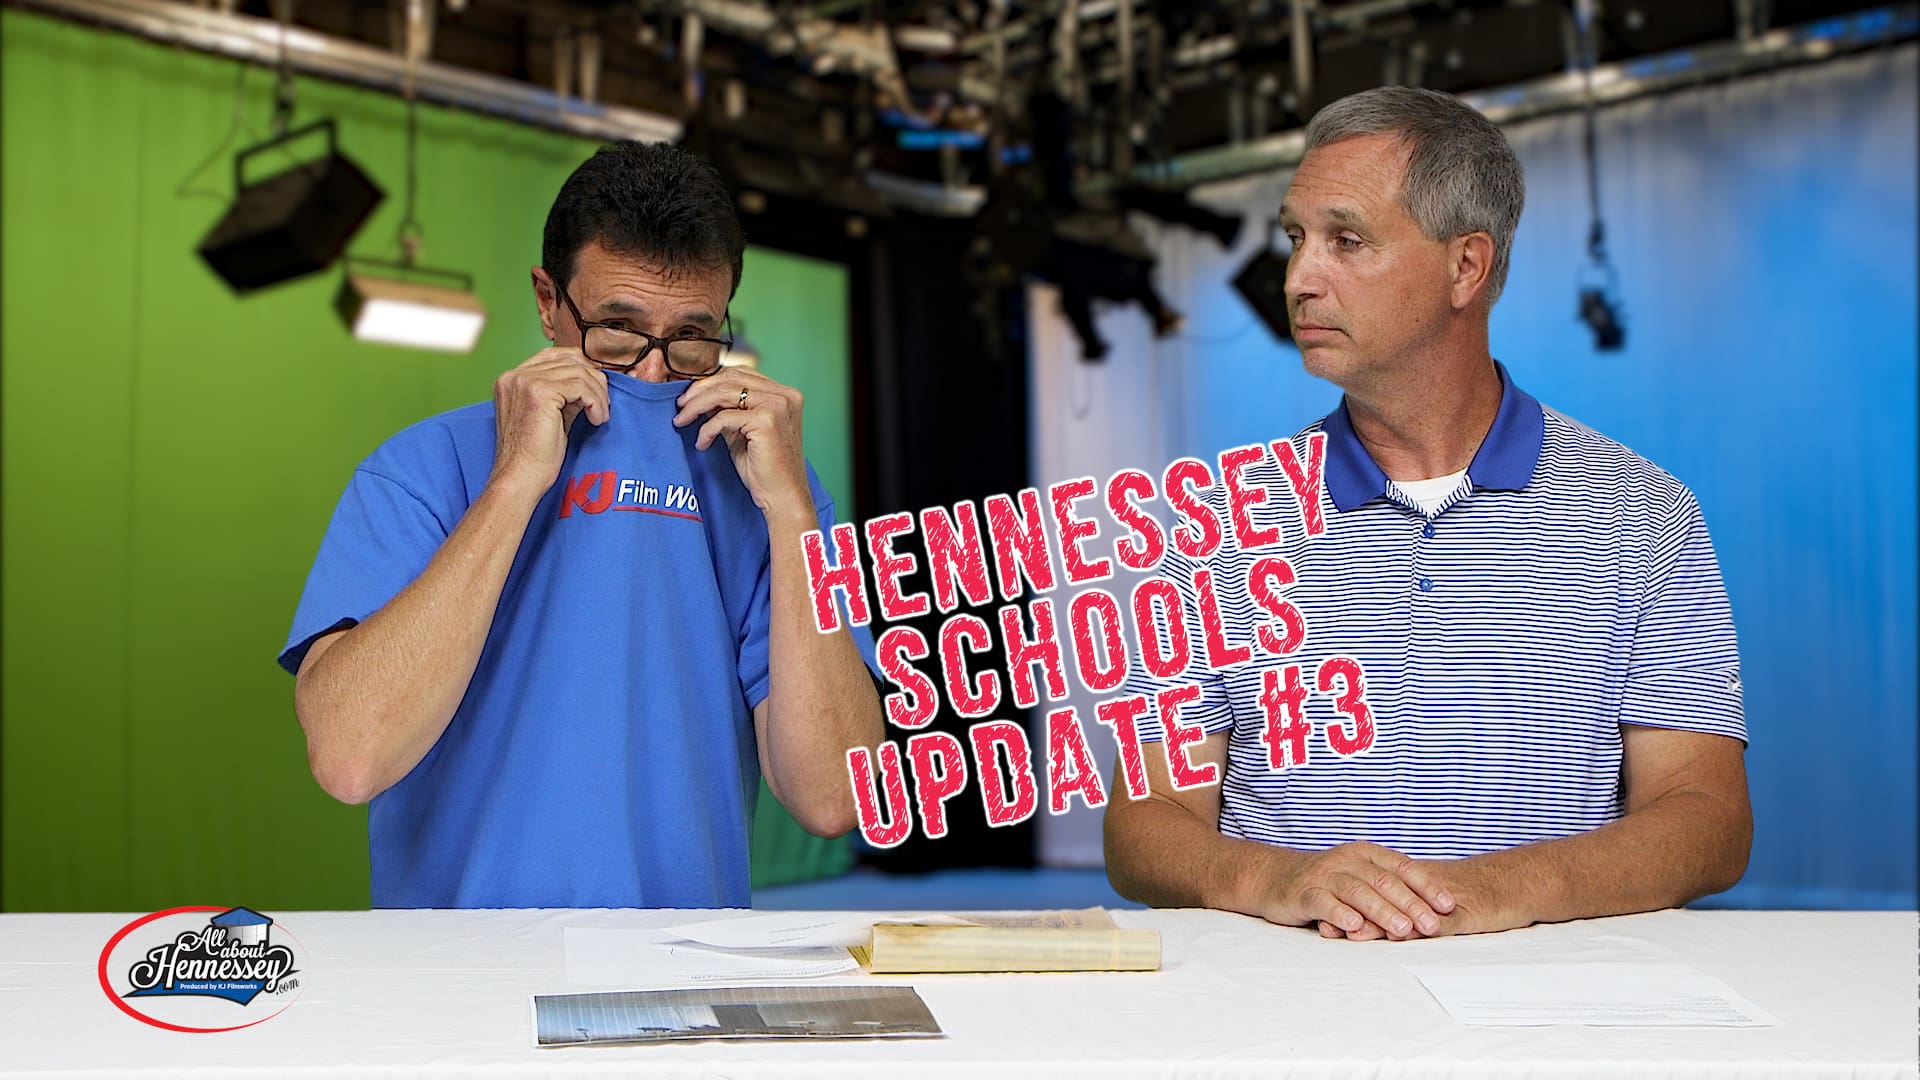 HENNESSEY SCHOOLS UPDATE WITH DR. WOODS, JULY 17TH